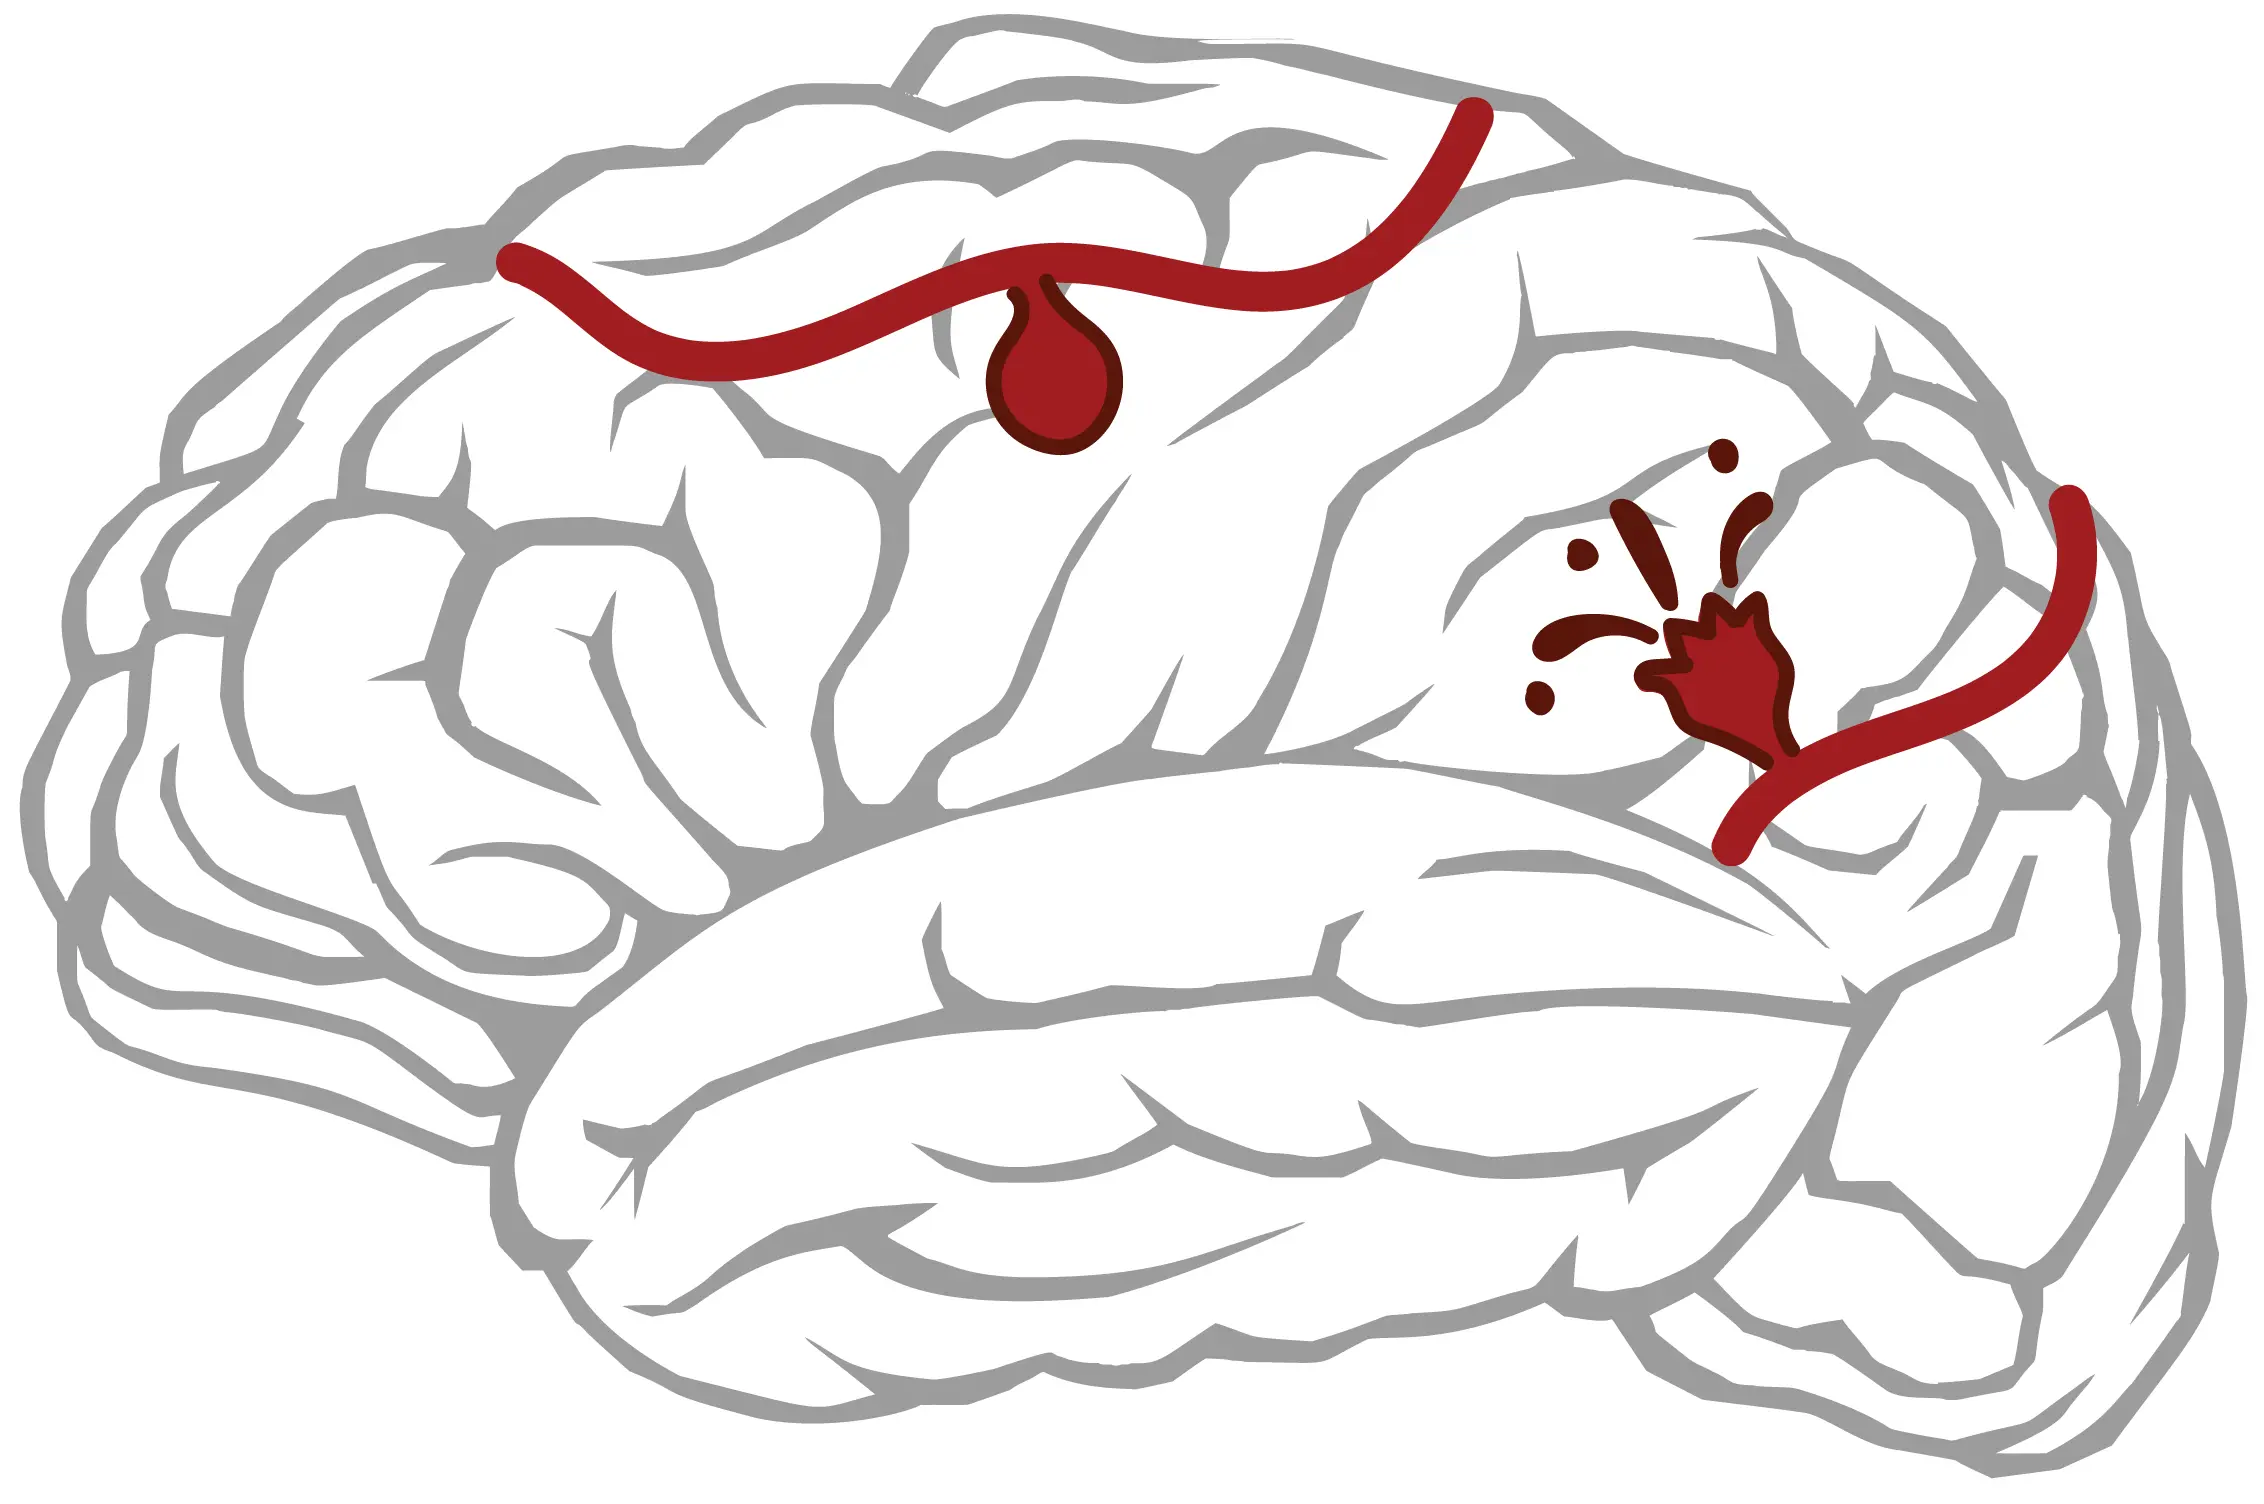 Brain aneurysms are blood vessels in the brain that are ballooned outward and filled with blood.